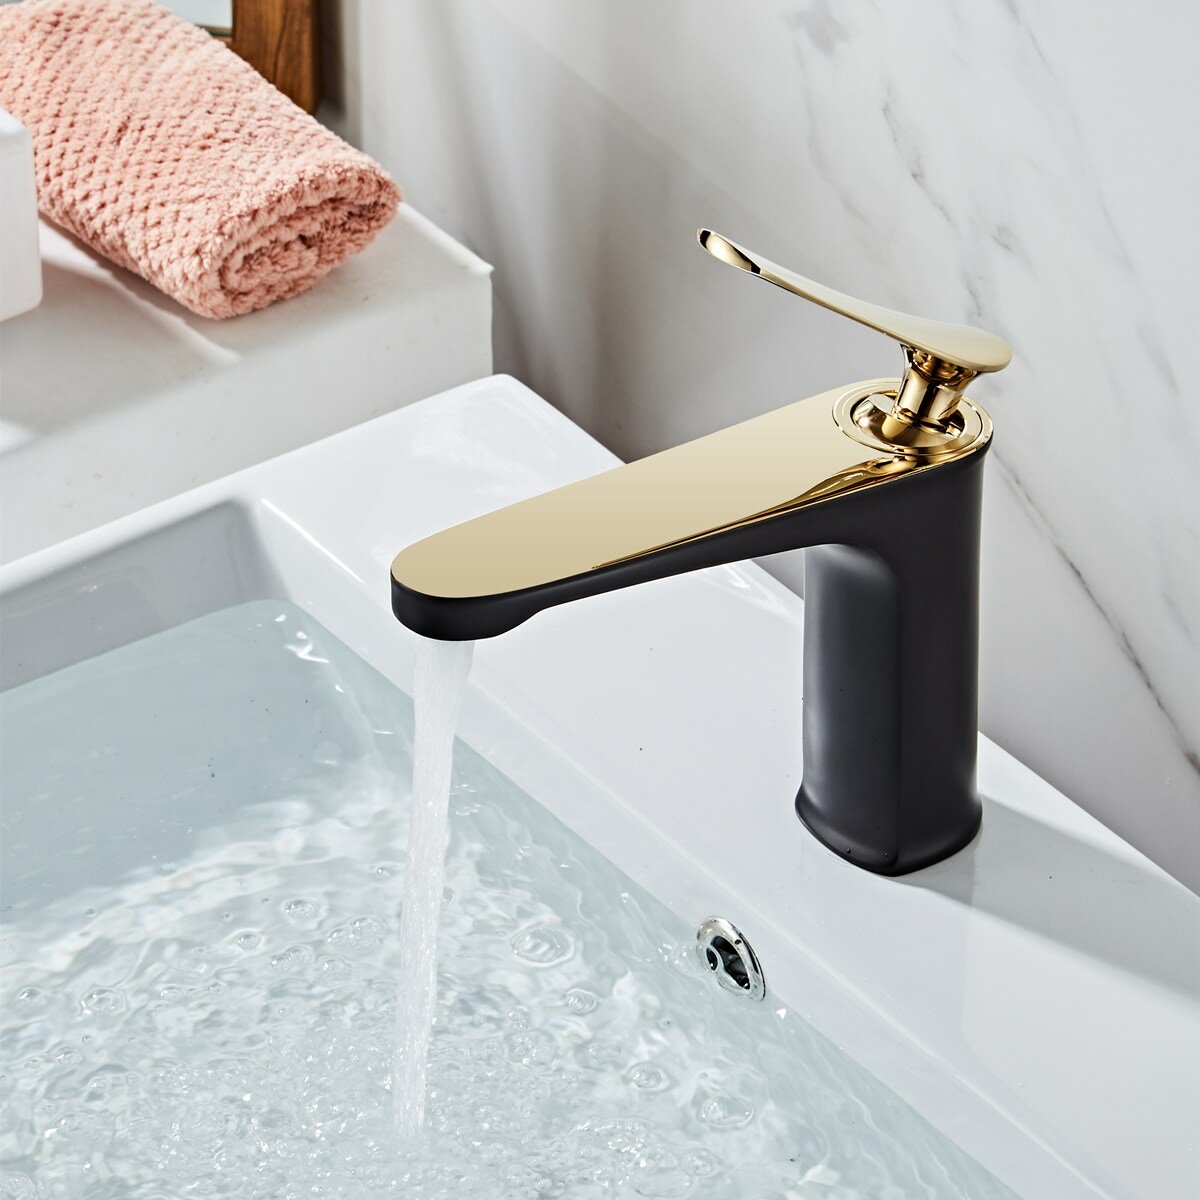 Luxury Bathroom Basin Faucet Hot Cold Water Mixer Sink Tap Gold Polished Handle Single Handle Brass 